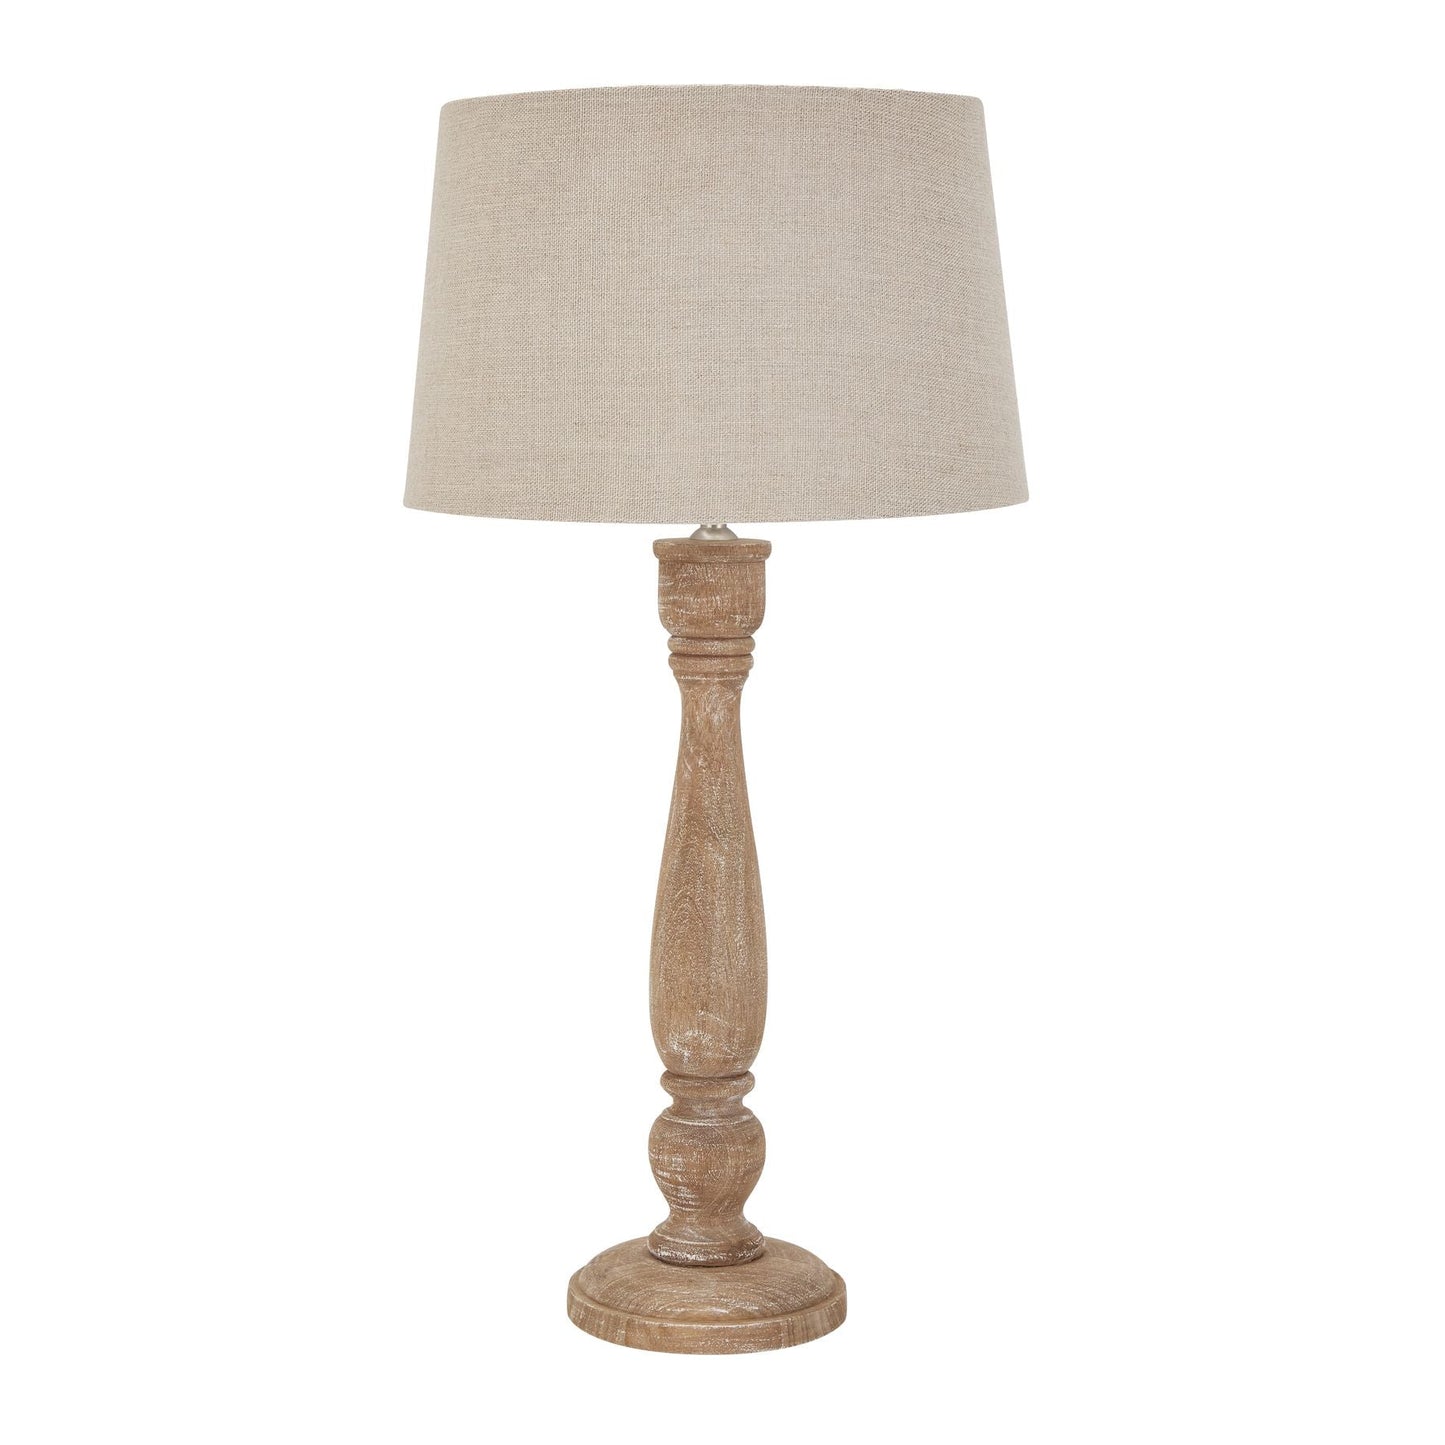 Hill Interiors Table Lamp Delaney Natural Wash Candlestick Lamp With Linen Shade